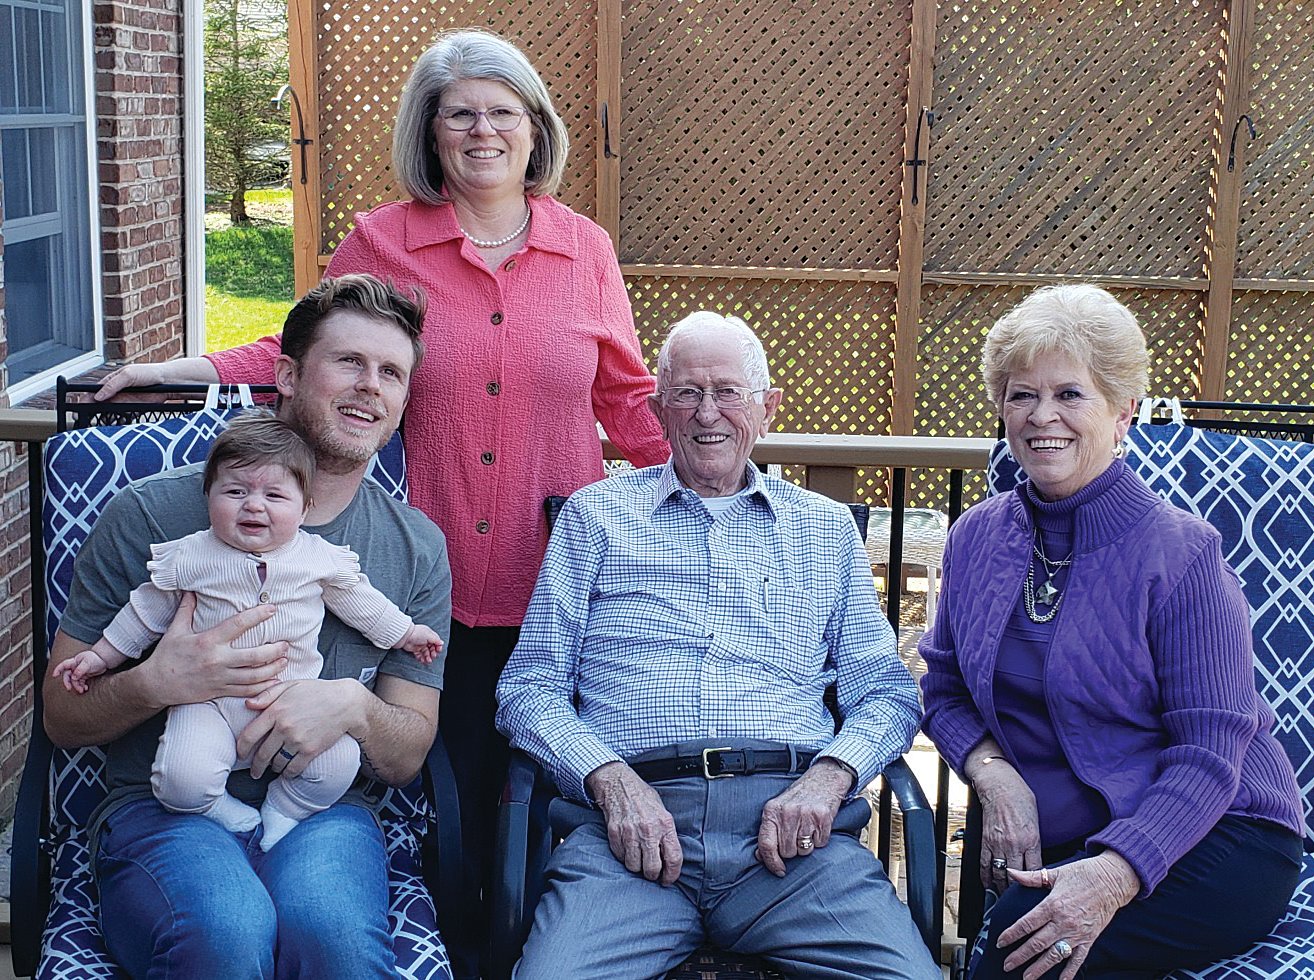 Gene Groce, 94, of Veedersburg is pictured with his daughter Caroline Davis of Hillsboro, his granddaughter Angie McCloskey of Zionsville, his great-grandson Sean McCloskey of Westfield and his great-great-granddaughter Maeve McCloskey, six months. The family gathered together on March 27 to celebrate this five generation blessing.